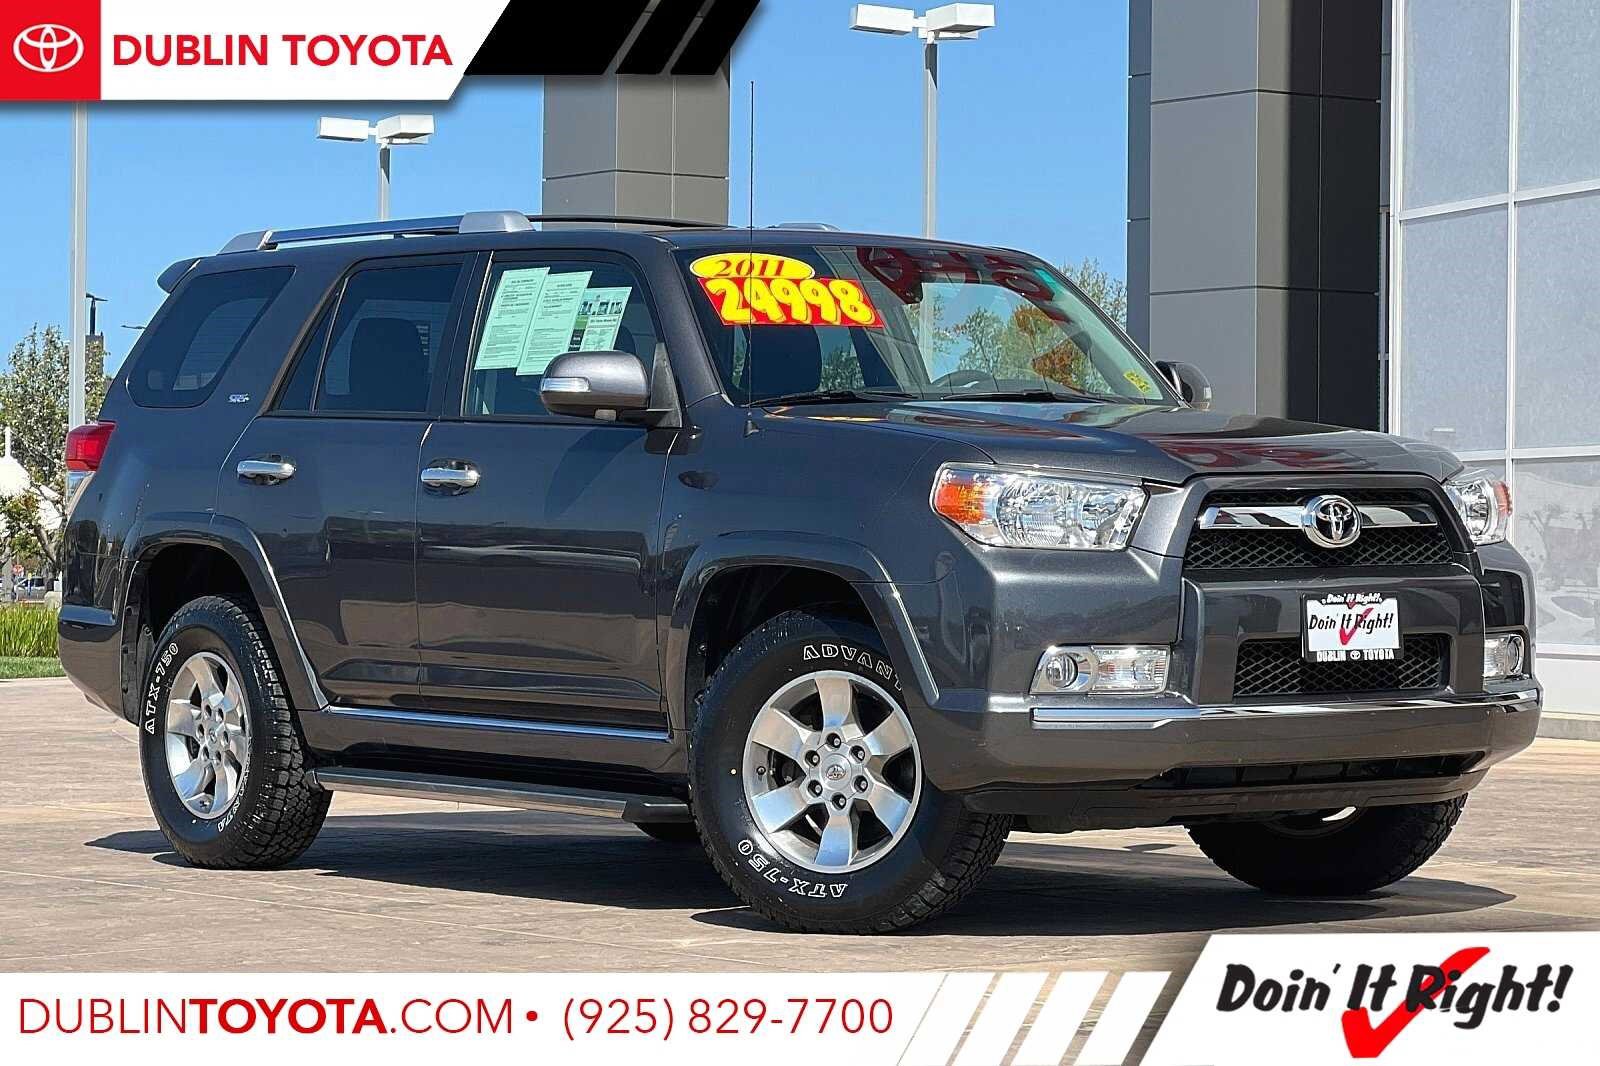 Used 2011 Toyota 4Runner for Sale in San Jose, CA (Test Drive at Home) -  Kelley Blue Book